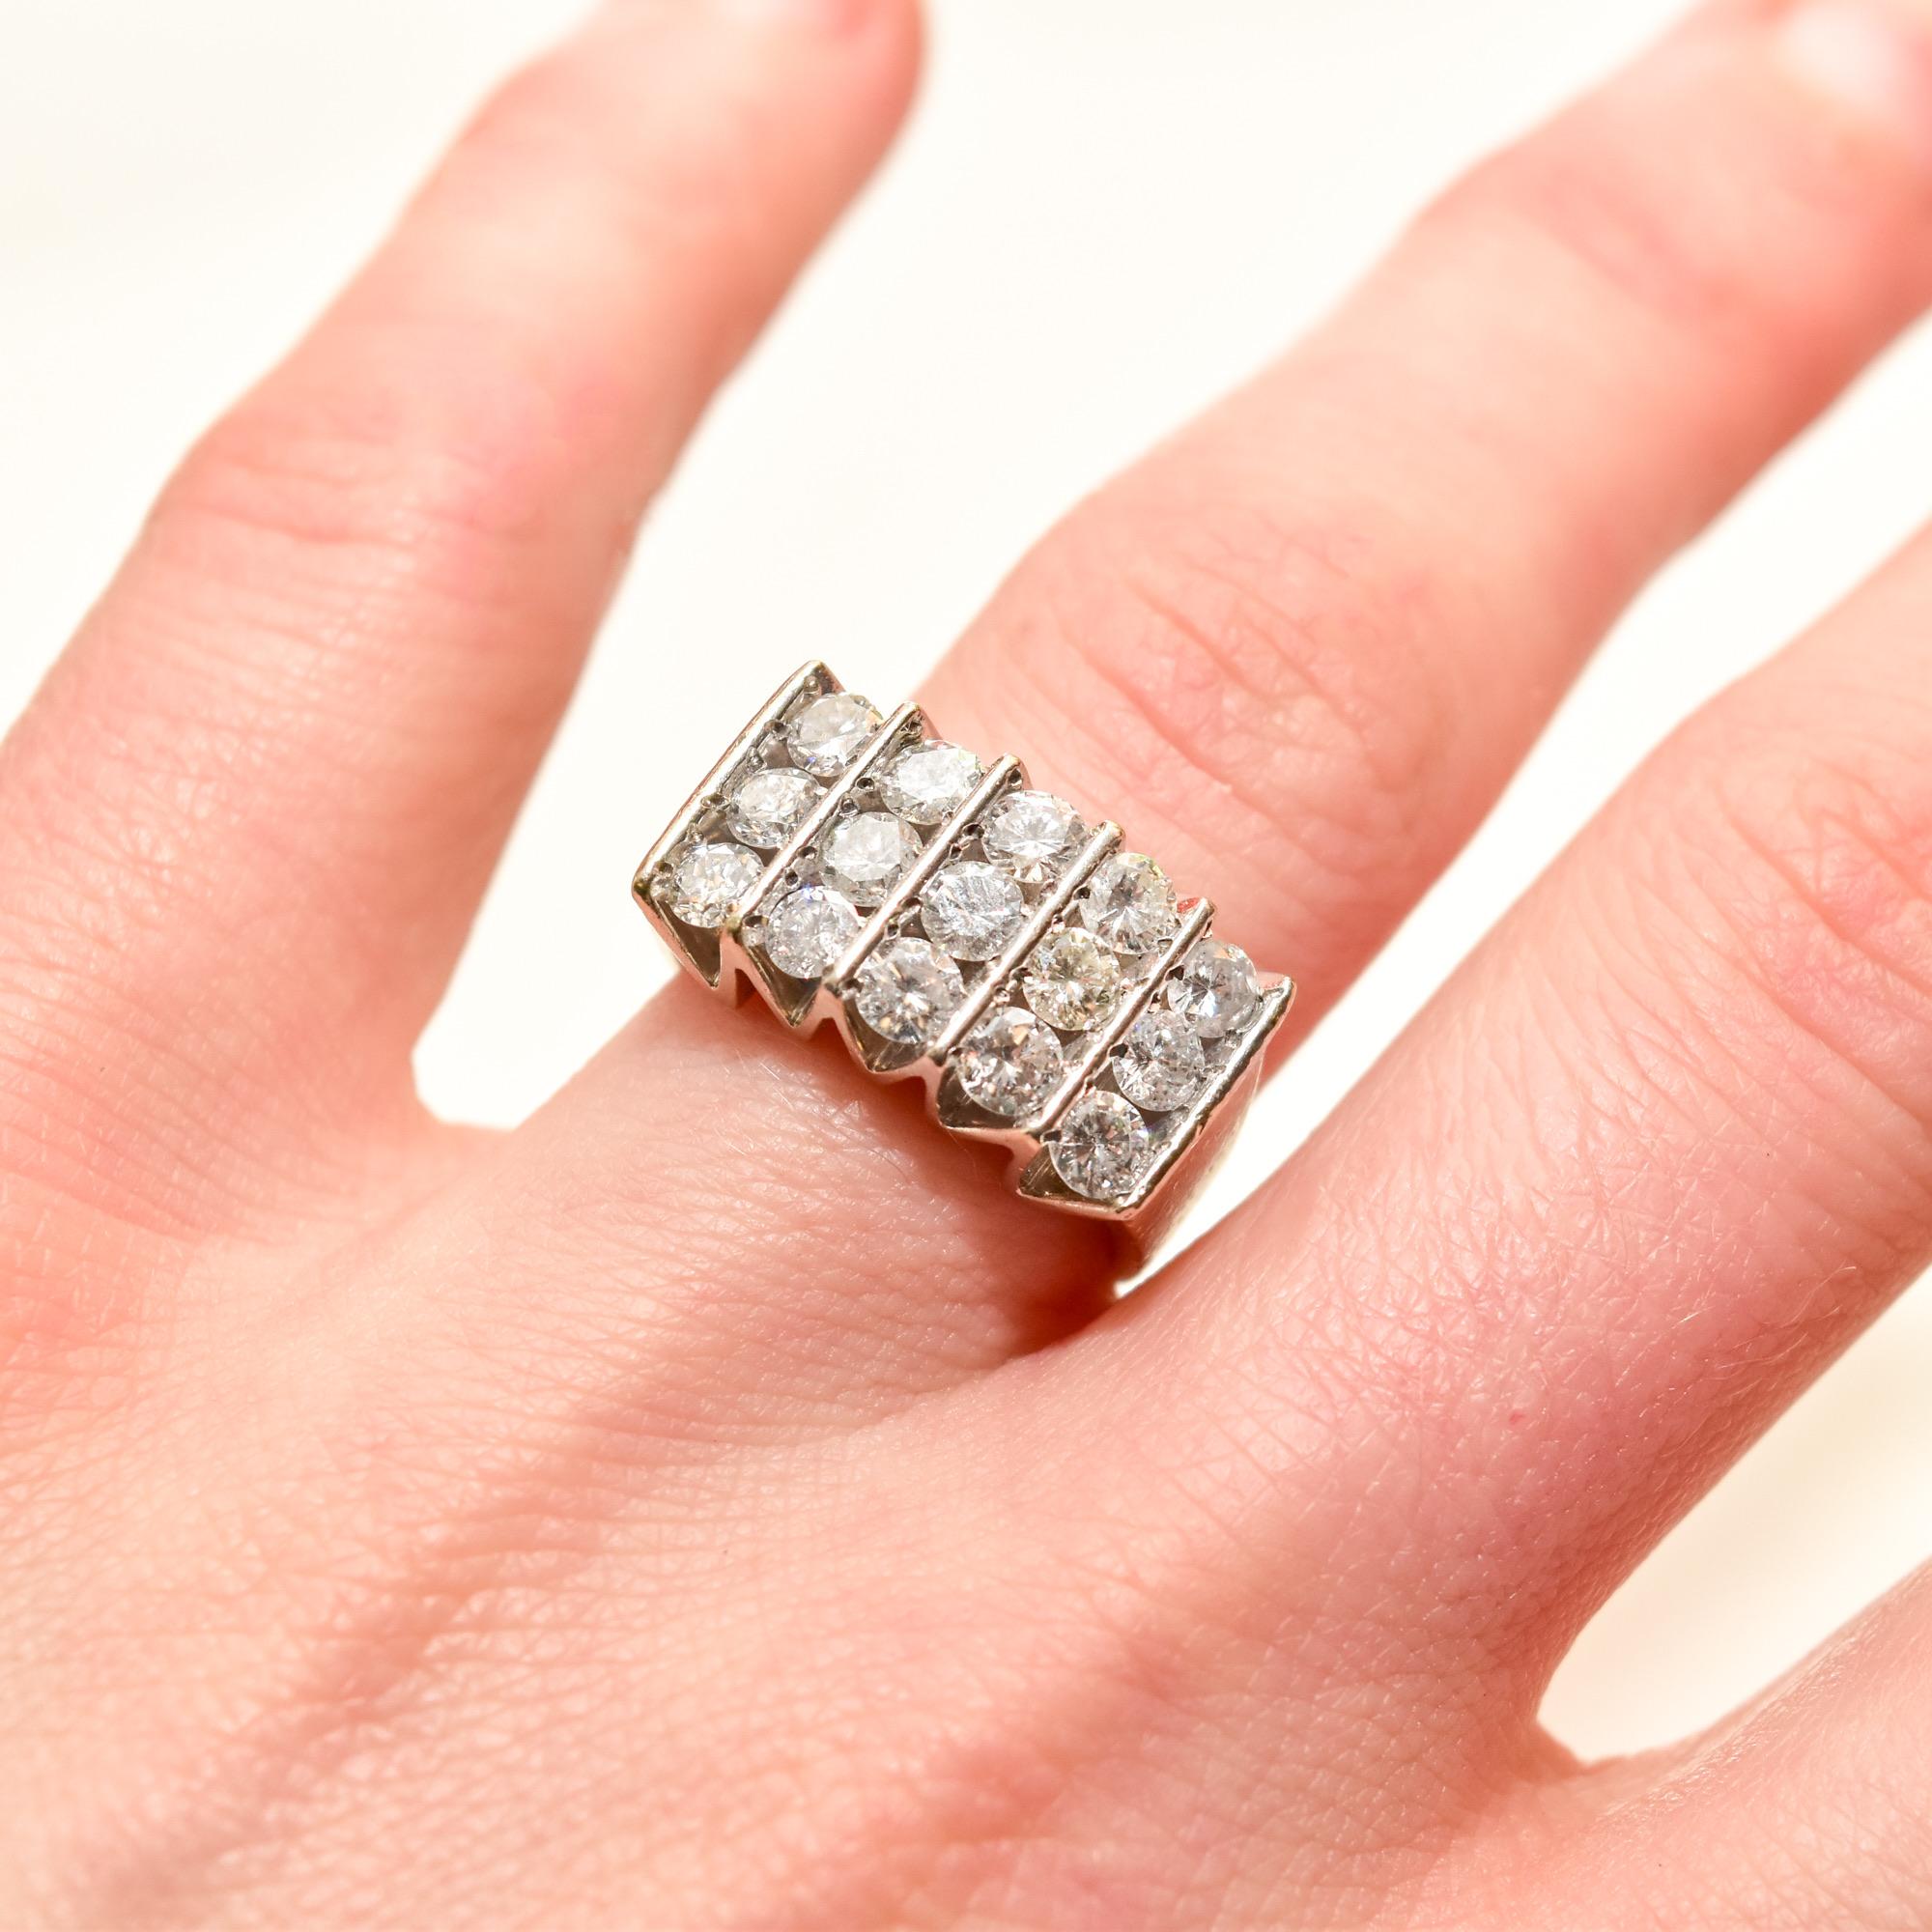 An incredible vertical 5-row diamond ring in 14k white gold. Features 15 brilliant-cut diamonds arranged in 5 vertical channel settings. The gallery boasts a modernist zig-zag design and the ring band has a wide tapered silhouette.   

The inner